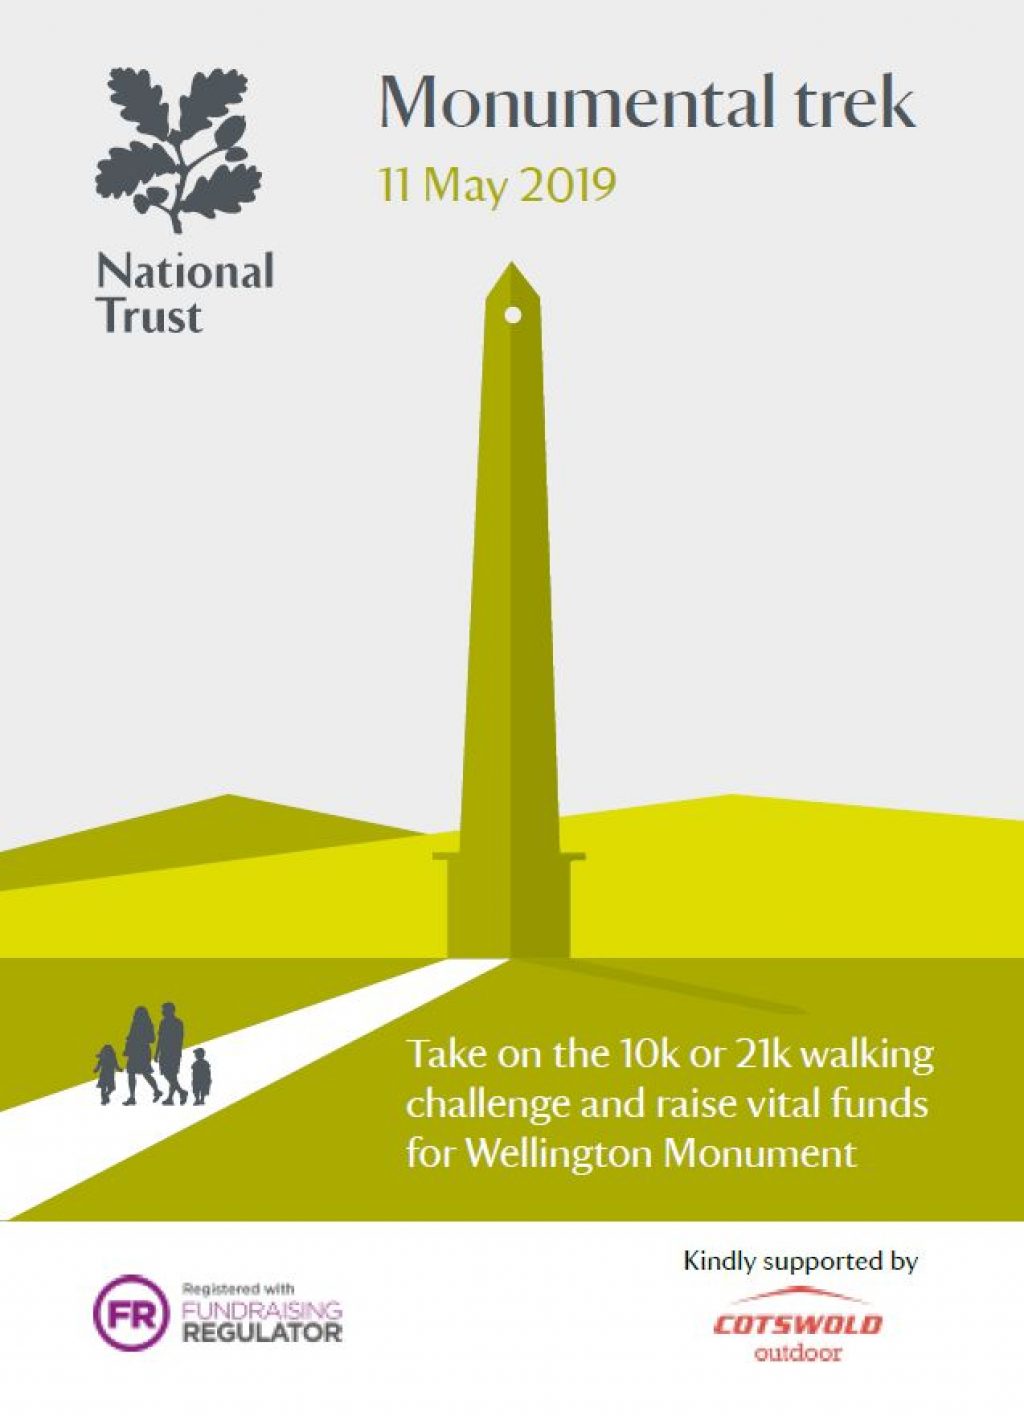 Monumental Trek. 11 May 2019. Take on the 10k or 21k walking challenge and raise vital funds for Wellington Monument organised by National Trust.